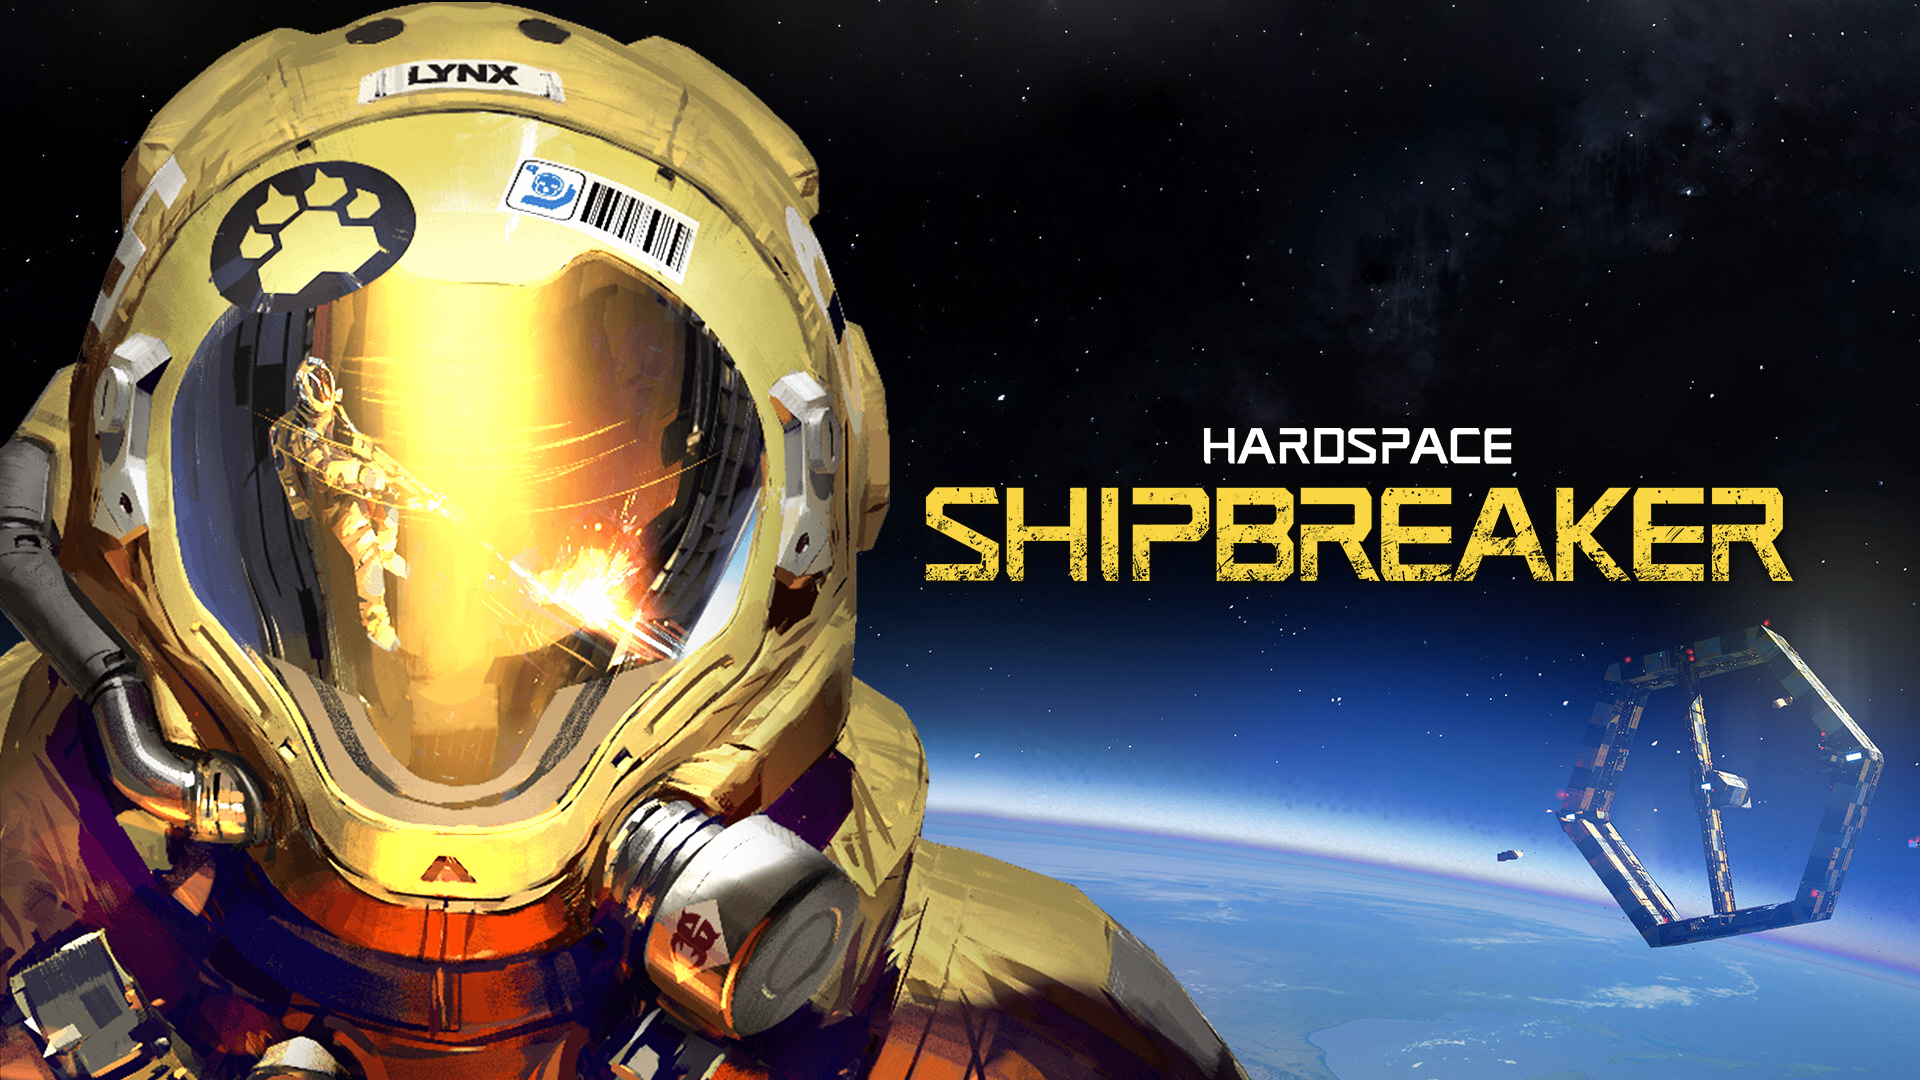 The second look at Hardspace: Shipbreaker is here now